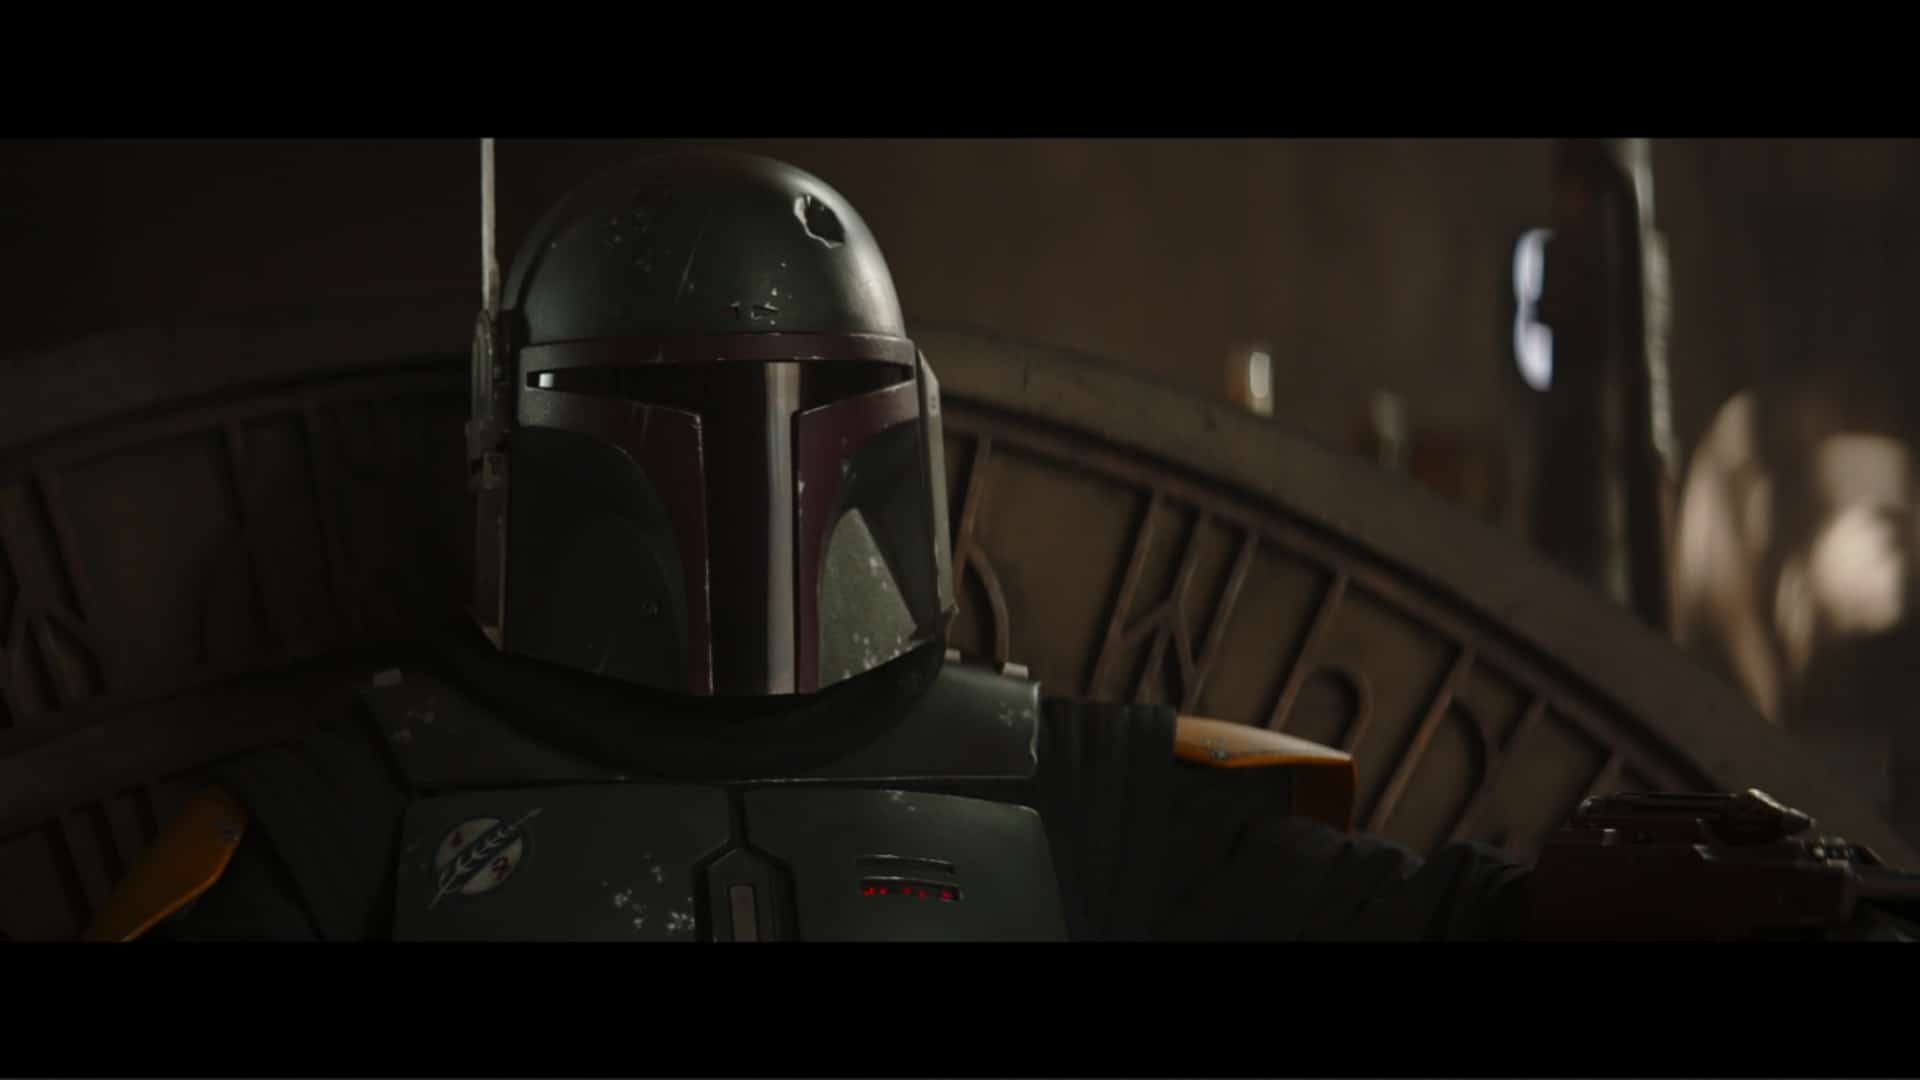 The Book of Boba Fett: Season 1/ Episode 1 “Chapter 1: Stranger in a Strange Land” [Series Premiere] – Recap/ Review (with Spoilers)